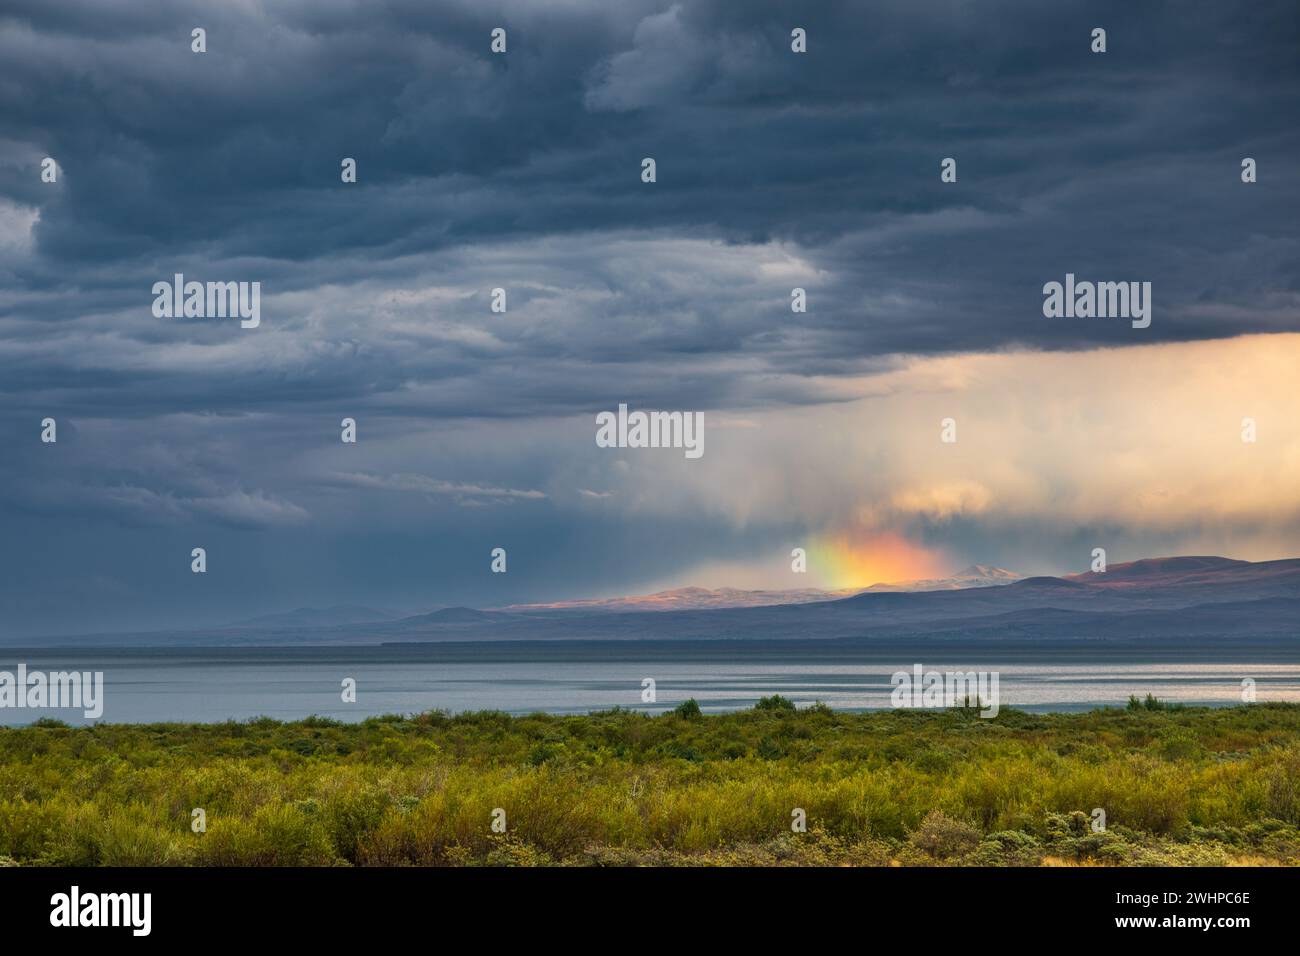 Sunset over Lake Sevan, the the largest body of water in both Armenia and the Caucasus region. Stock Photo